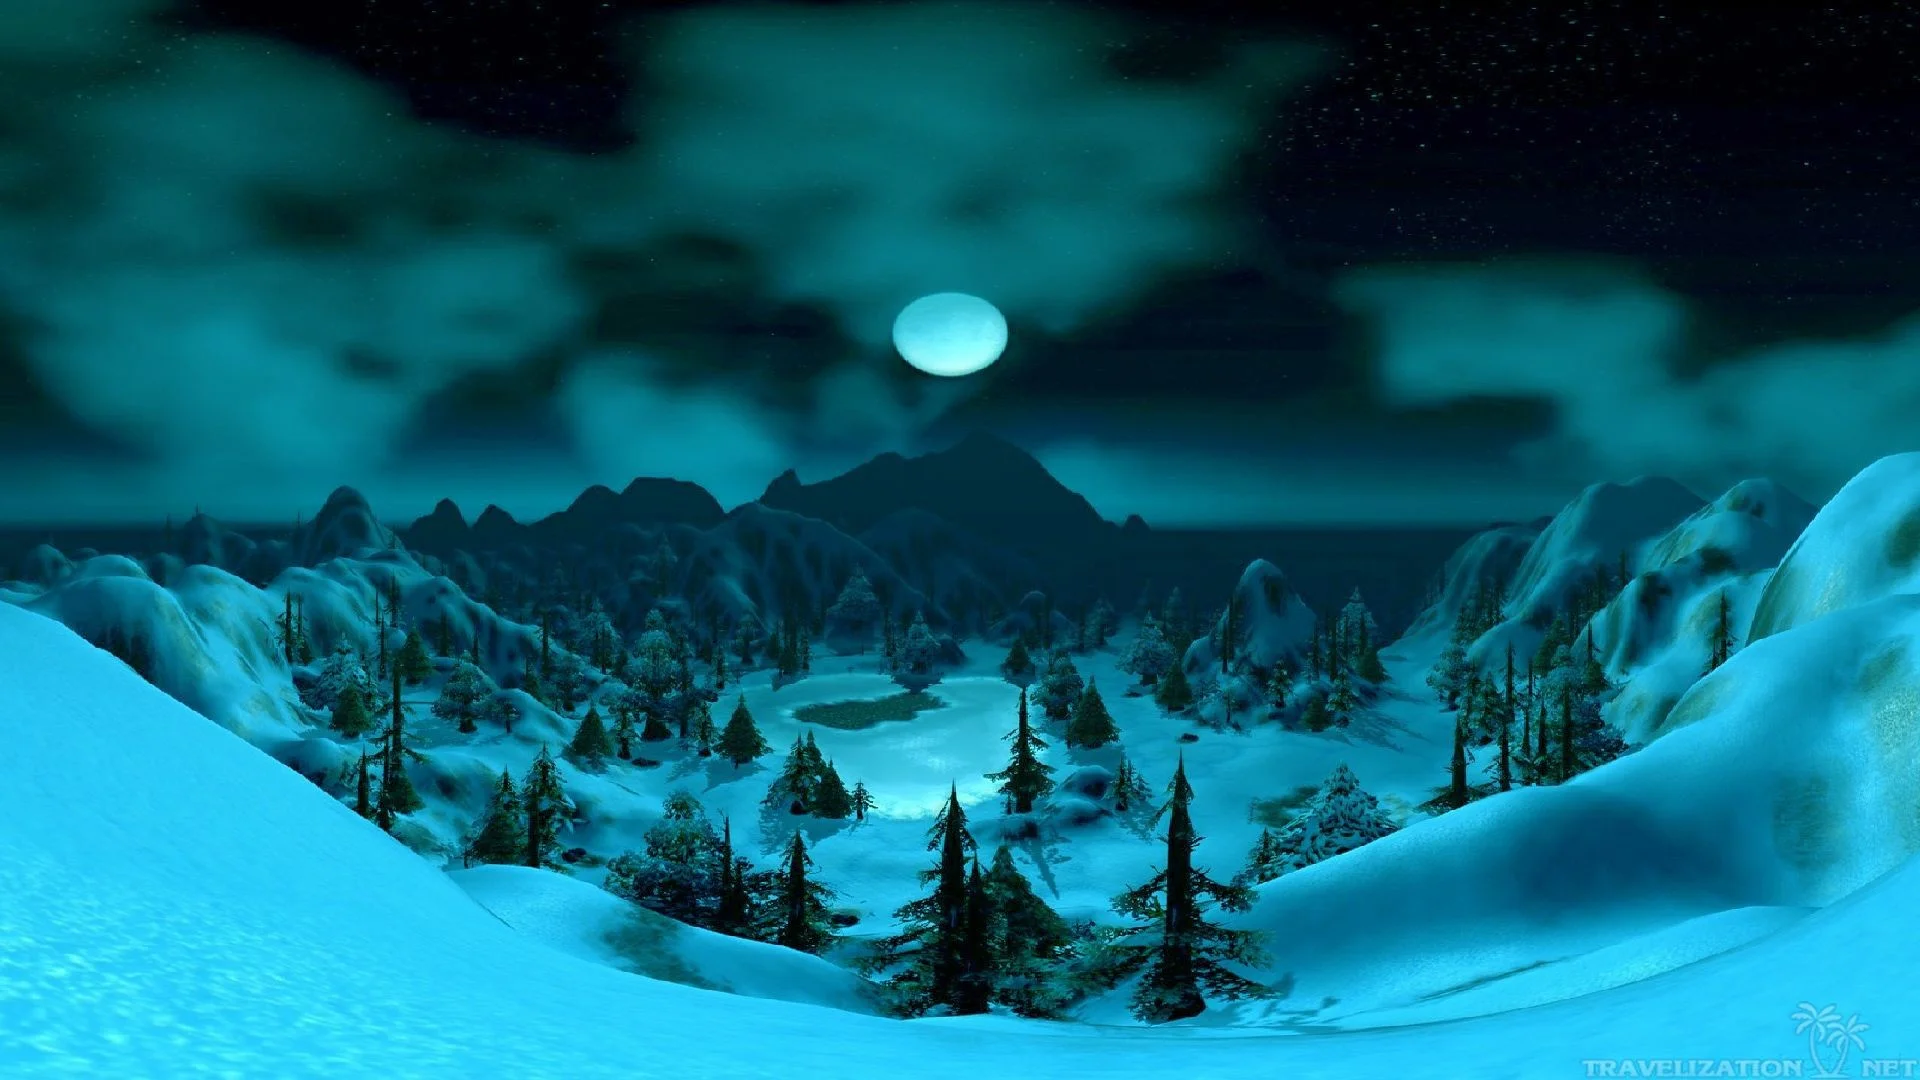 You can find Full Moon In Winter Night Wallpapers in many resolution such as 1024768, 12801024, 1366768,